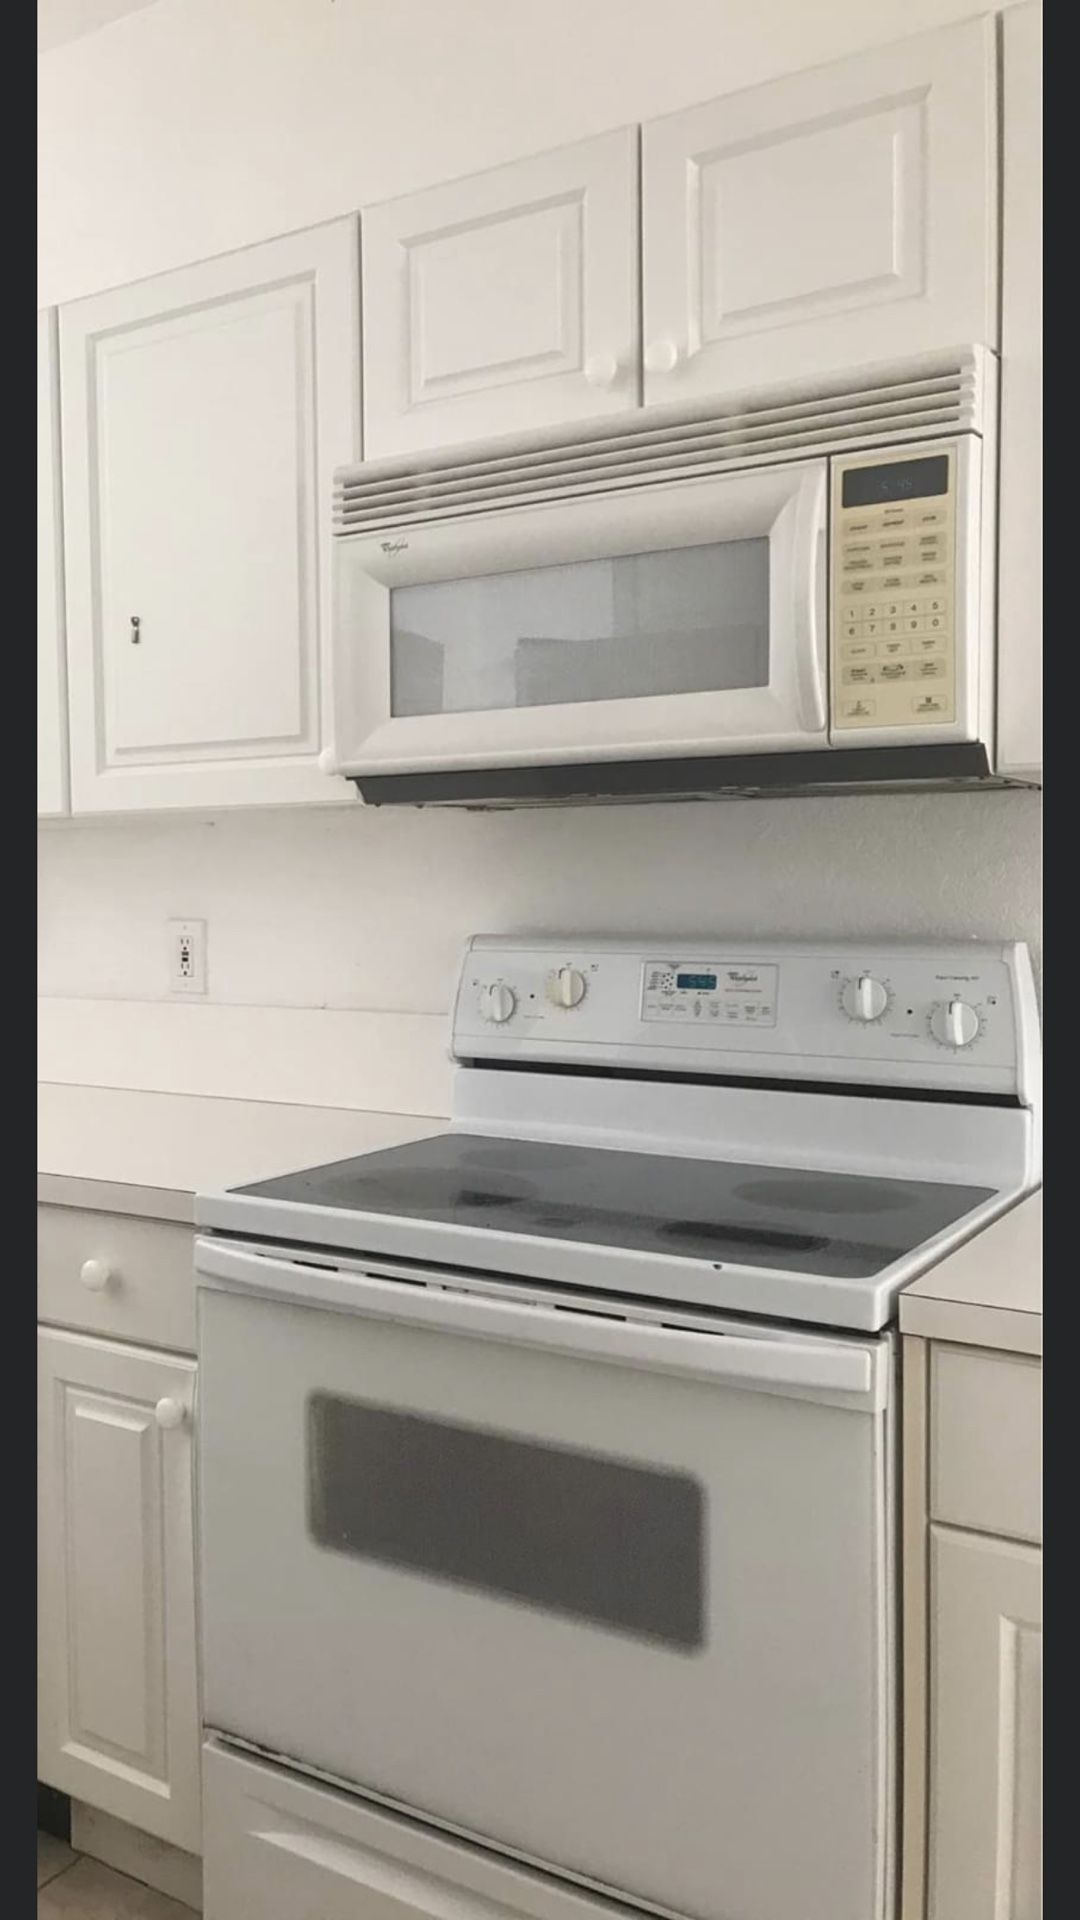 Whirlpool stove and microwave